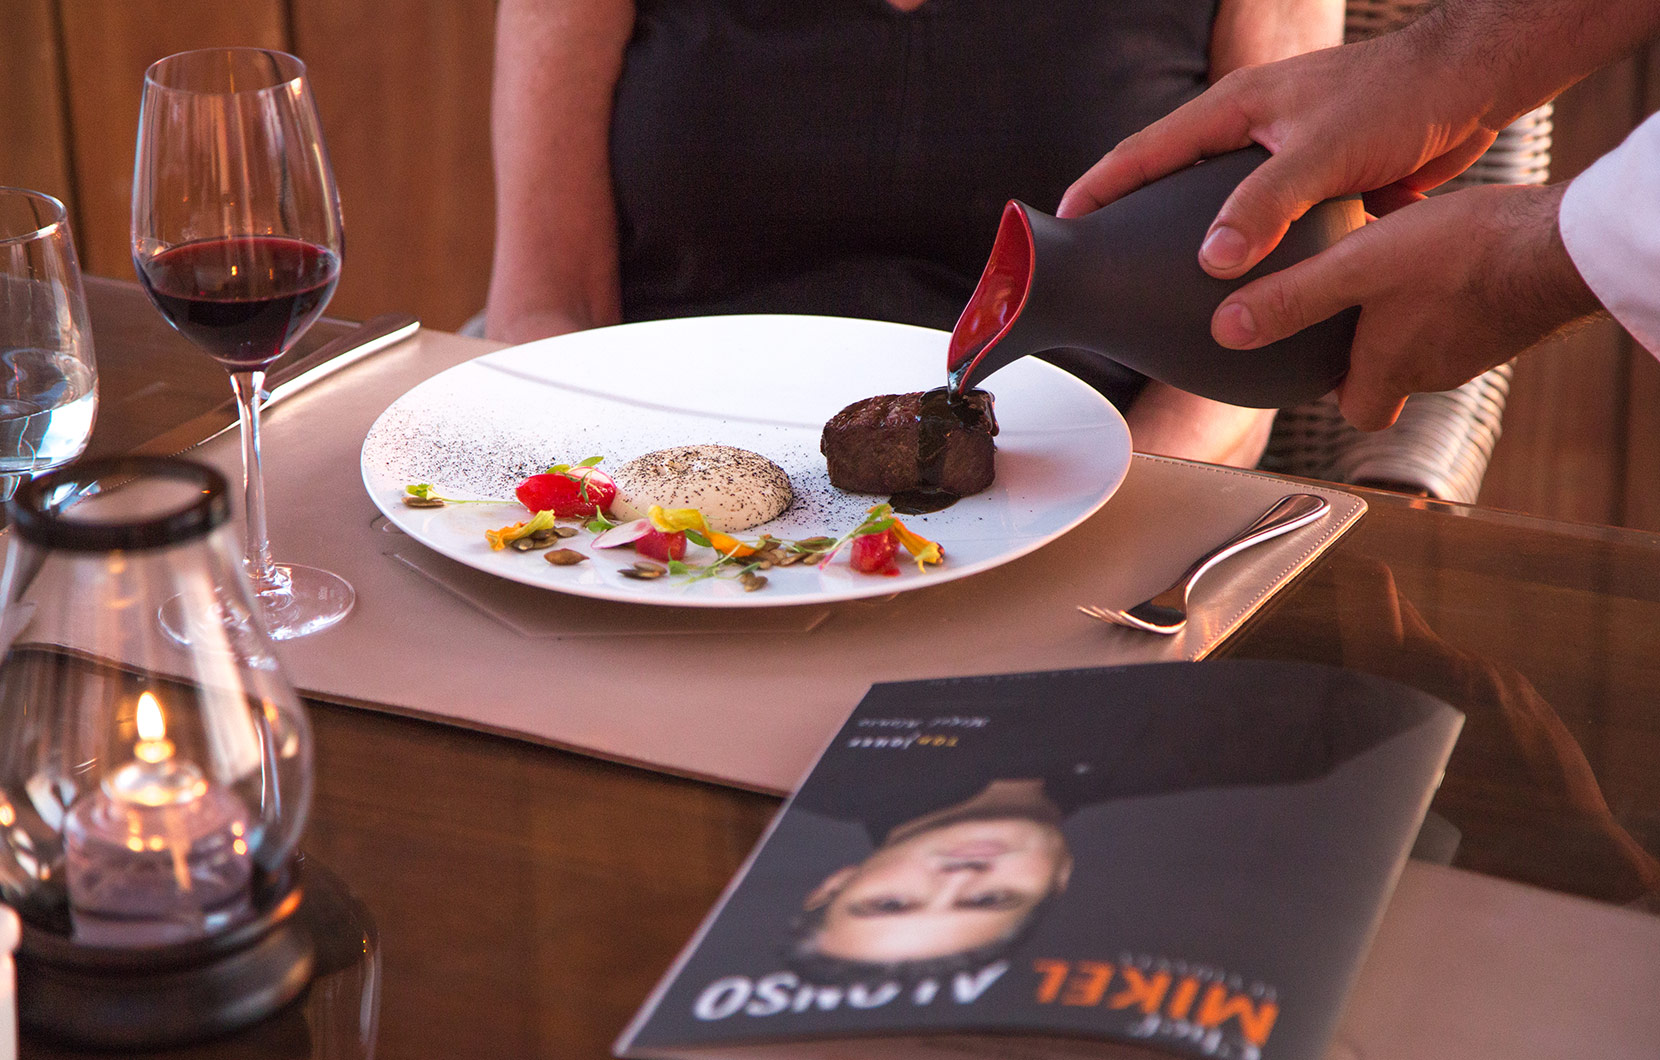 A diner enjoys the 8-course menu prepared by Chef Alonso at Quinto.